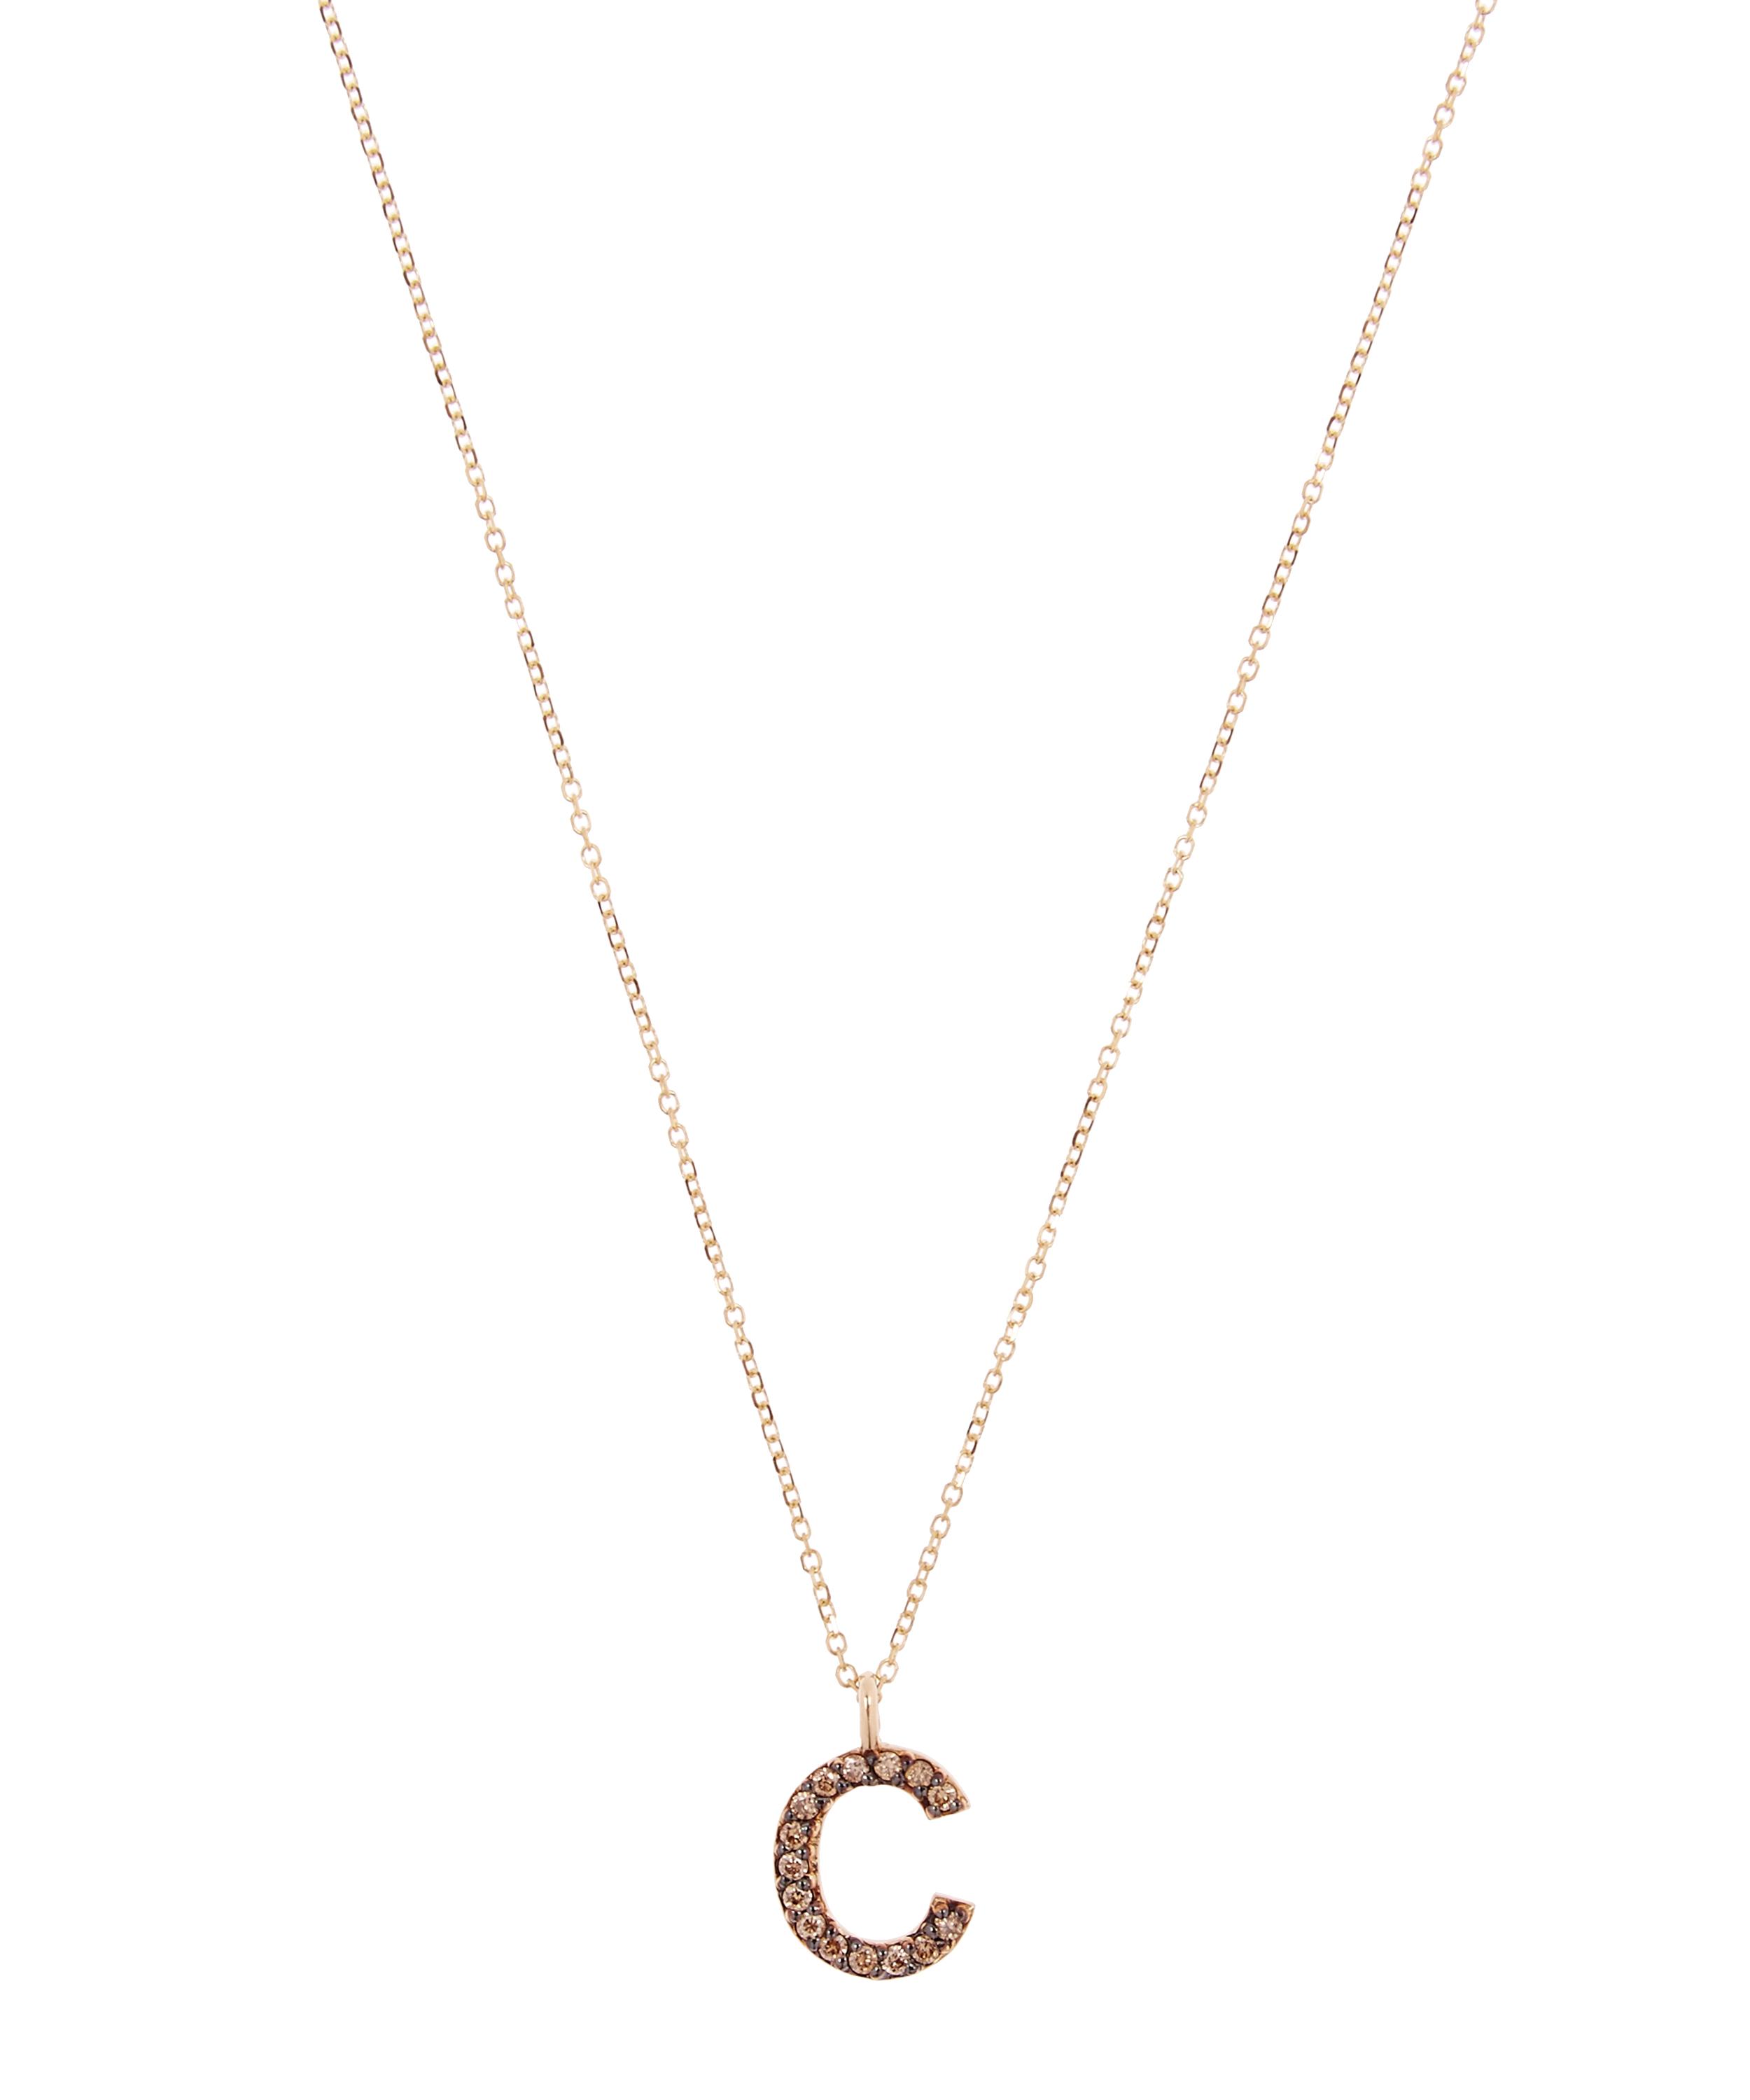 KC DESIGNS YELLOW GOLD CHAMPAGNE DIAMOND LETTER C NECKLACE